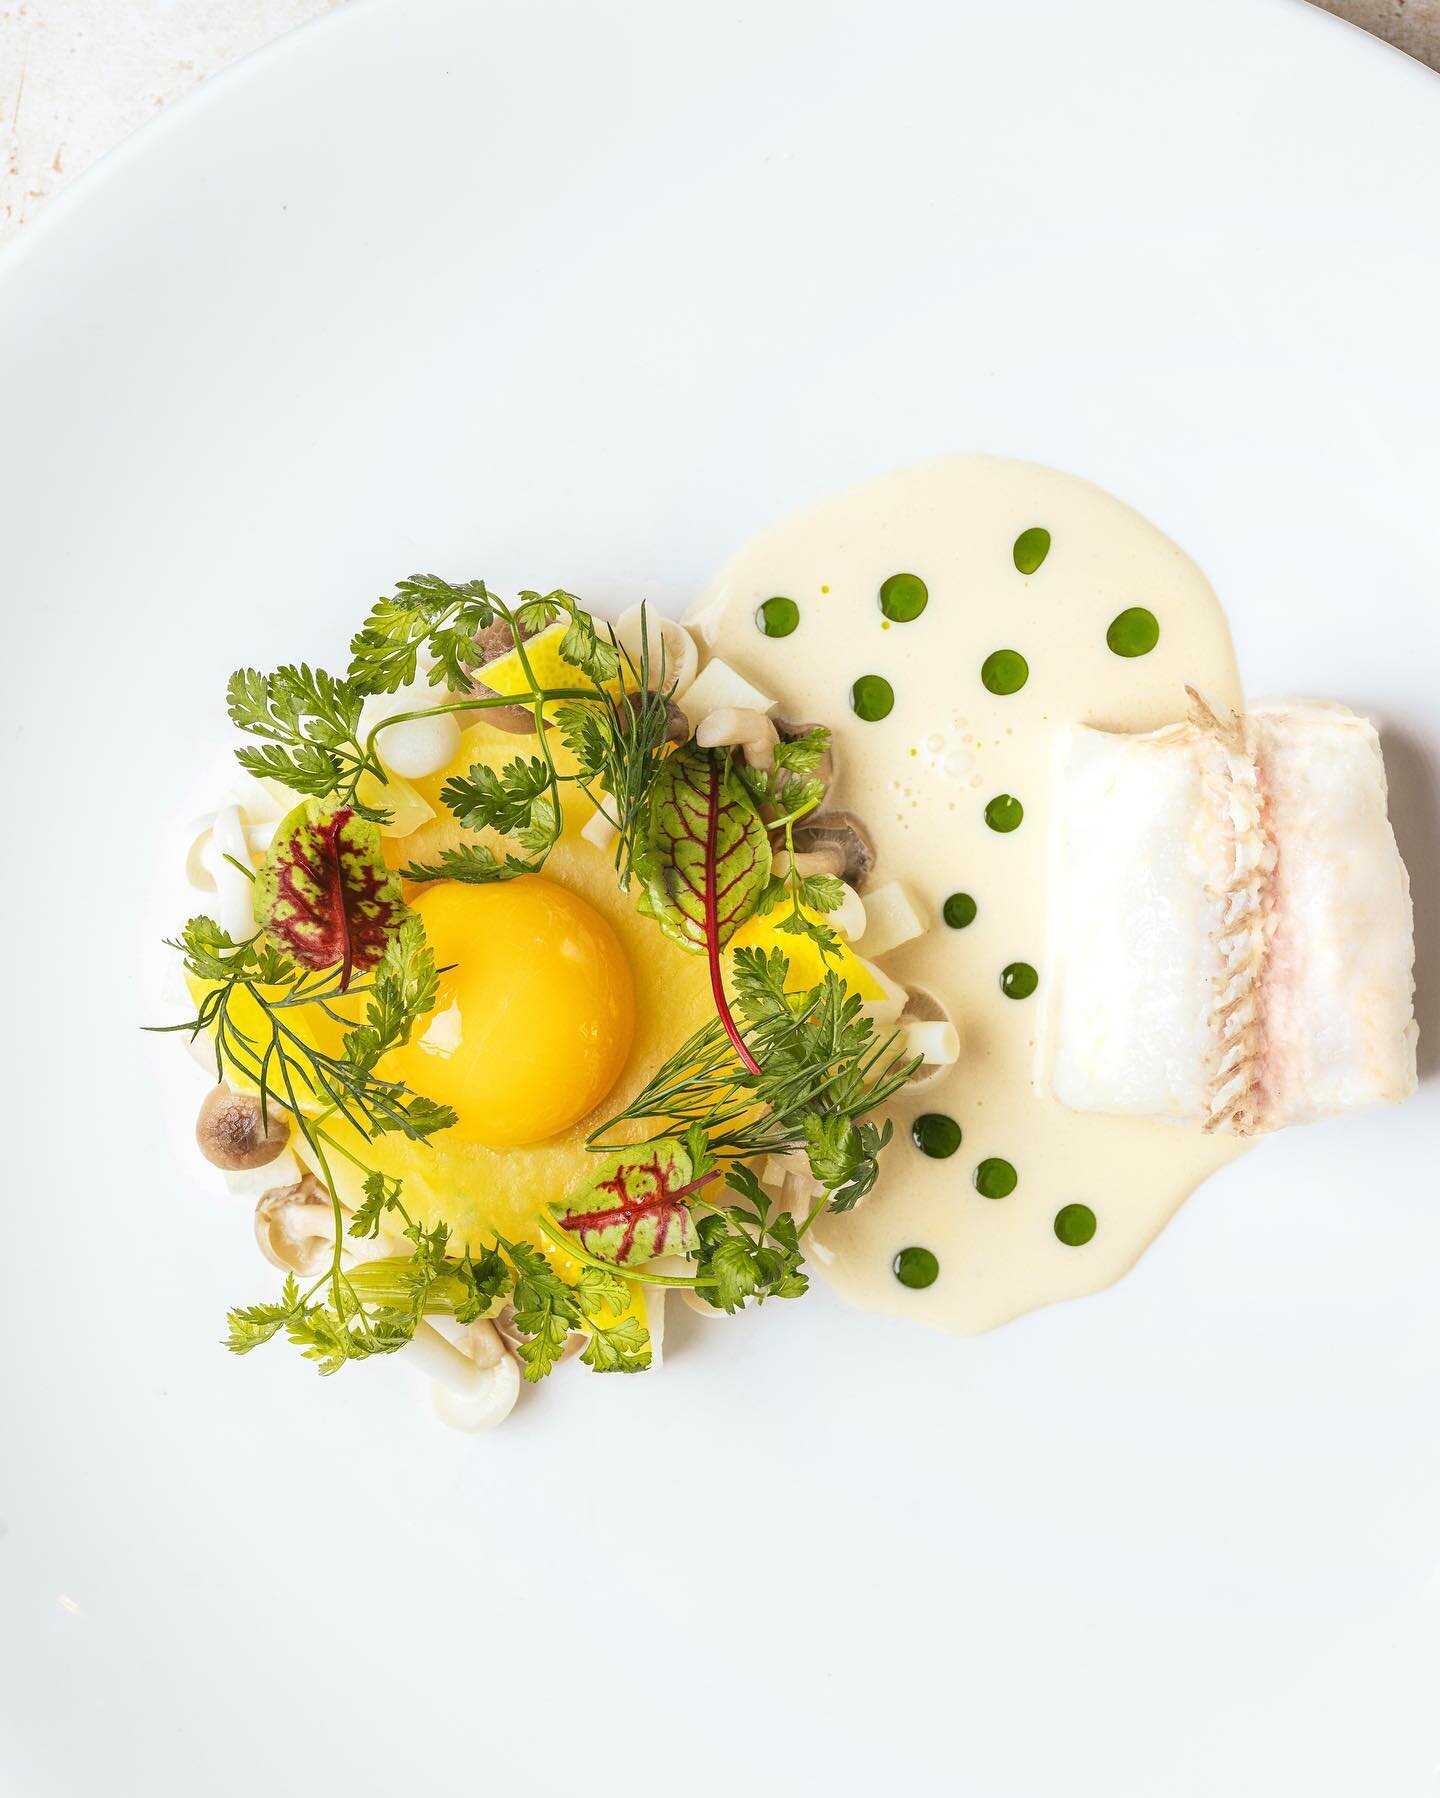 Rack Of Dover Sole 
Confit Egg Yolk, Golden Beetroot, Fish Velout&eacute; 

Book now - www.theploughkent.com

#finediningram #professionalchefs #culinarychefs #chefcreations #cheftalks #chefsofig #culinaireinspiratie #foodplating #gourmetchef #plateu